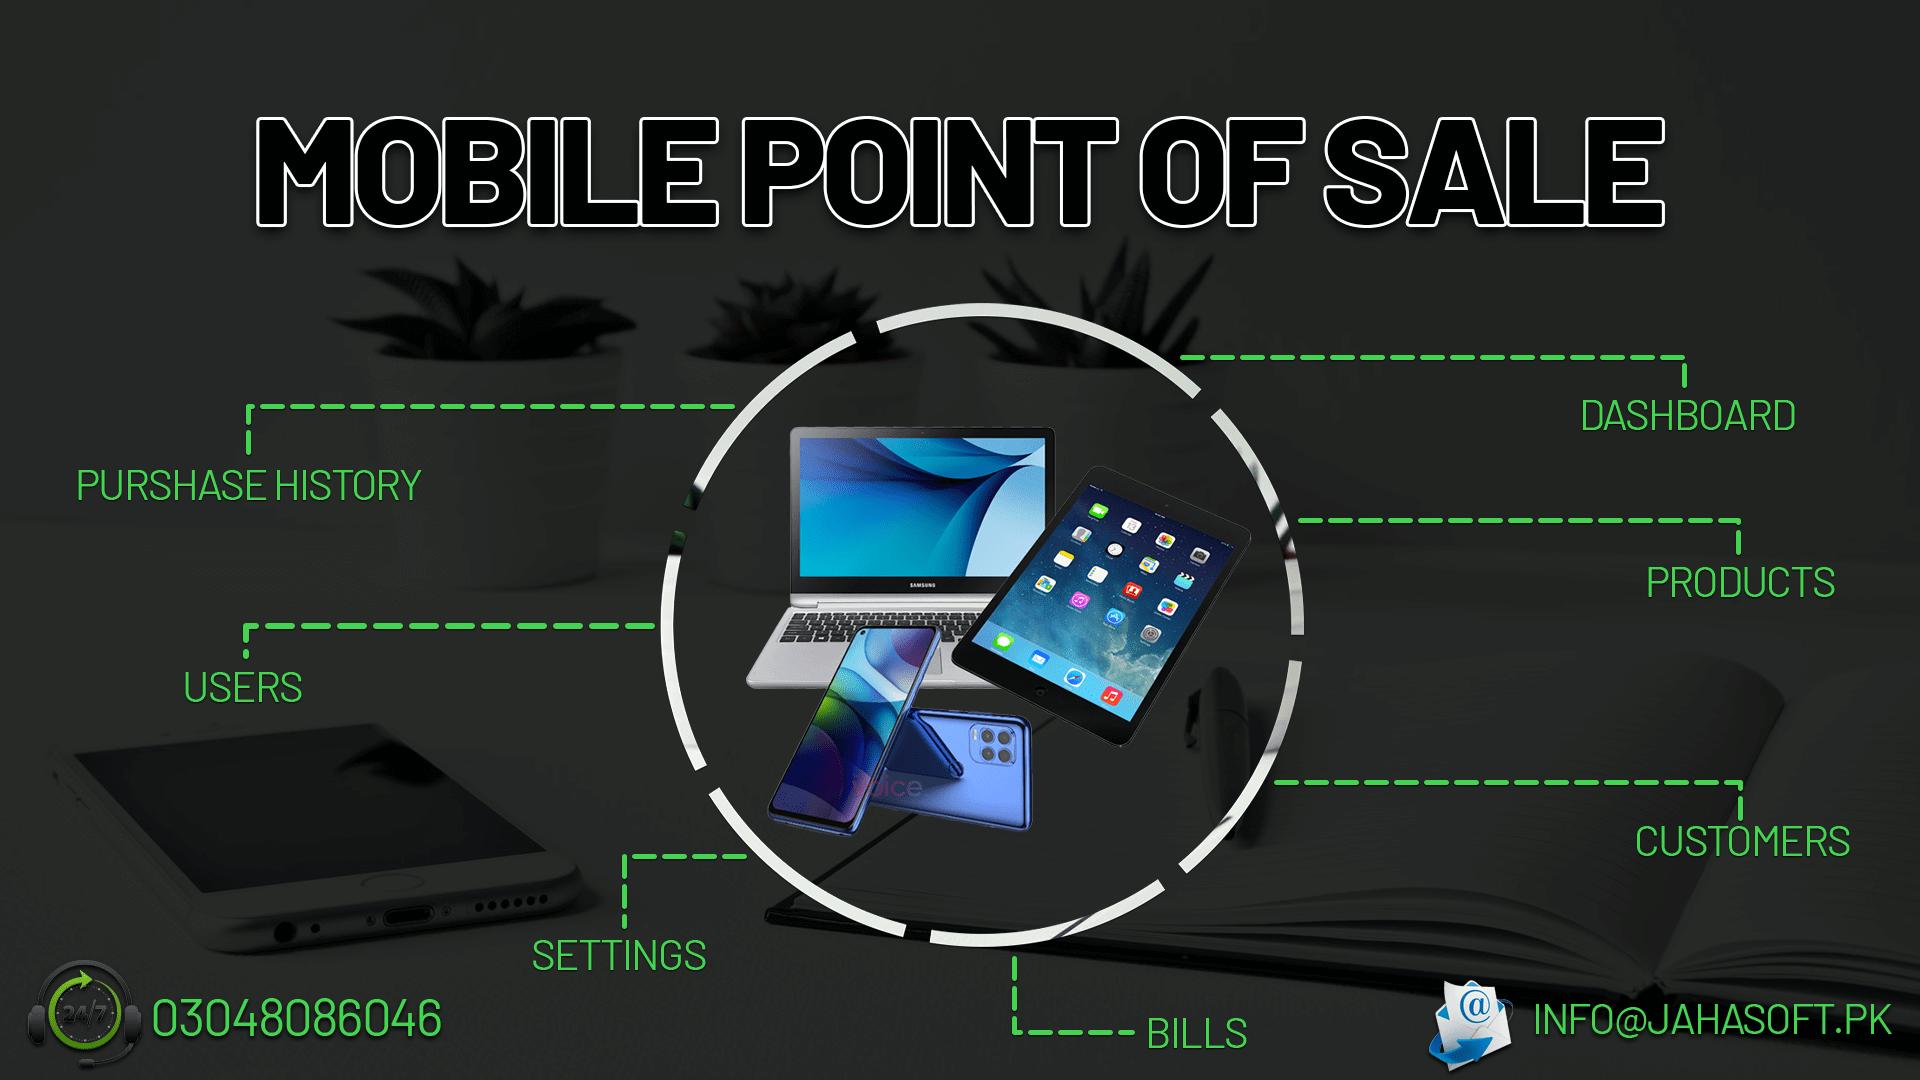 Mobile Point of Sale